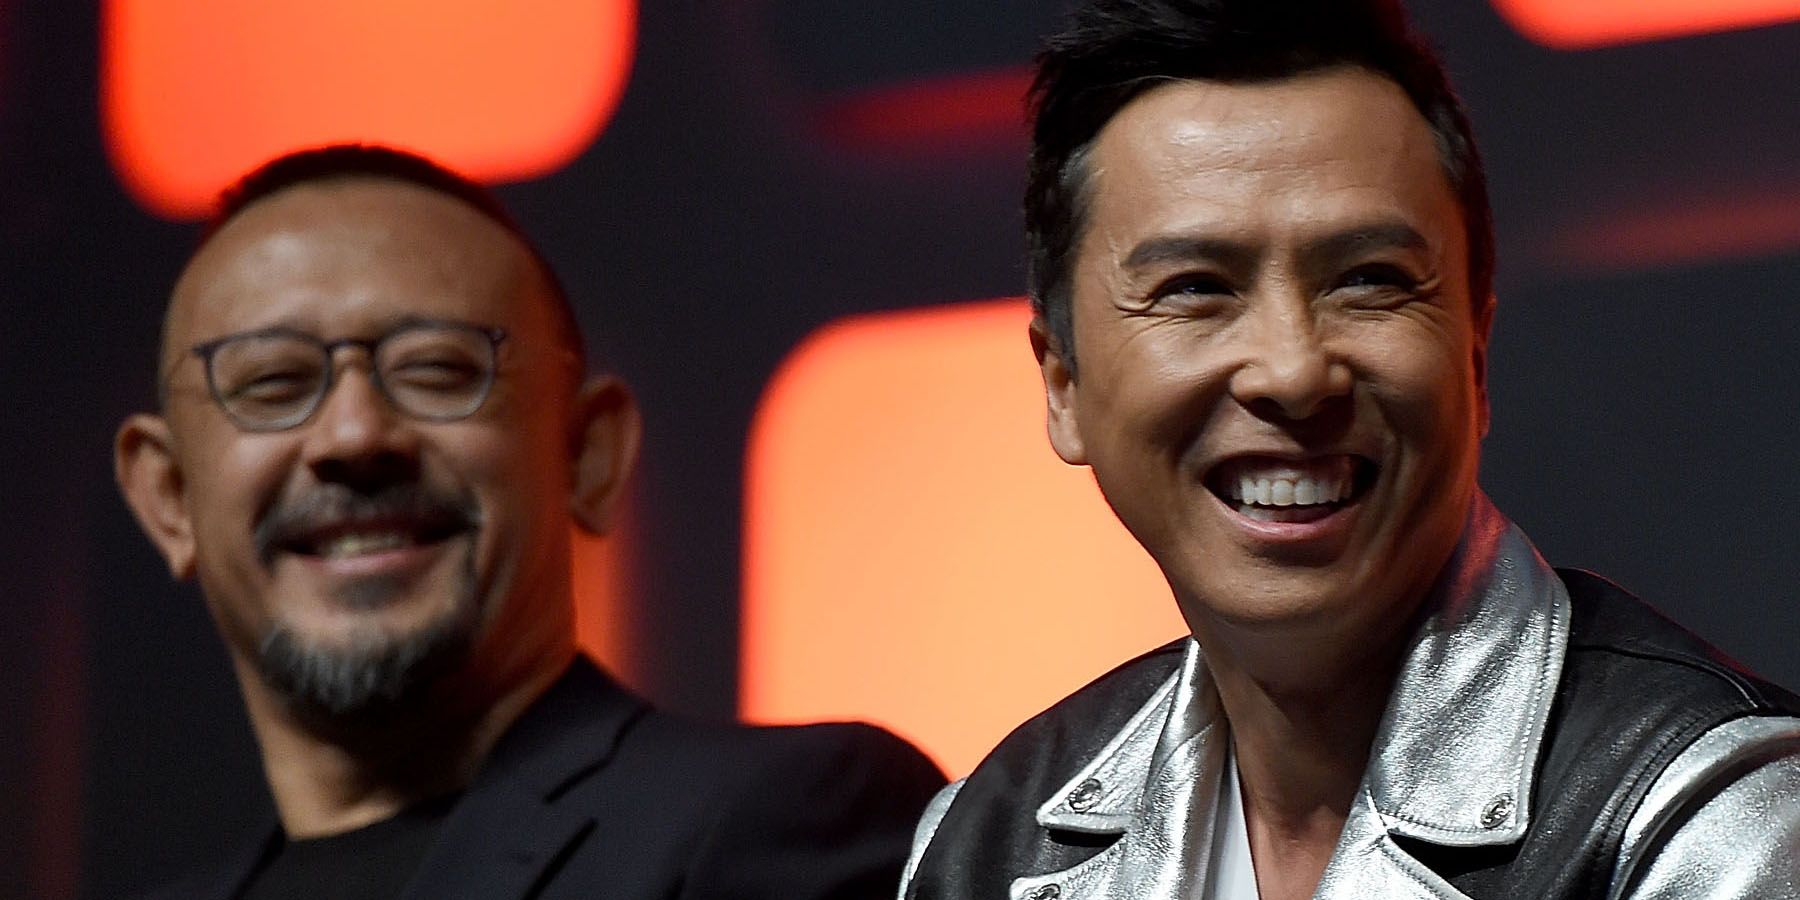 Star Wars Celebration Europe 2016 - Wen Jiang and Donnie Yen at Rogue One Panel